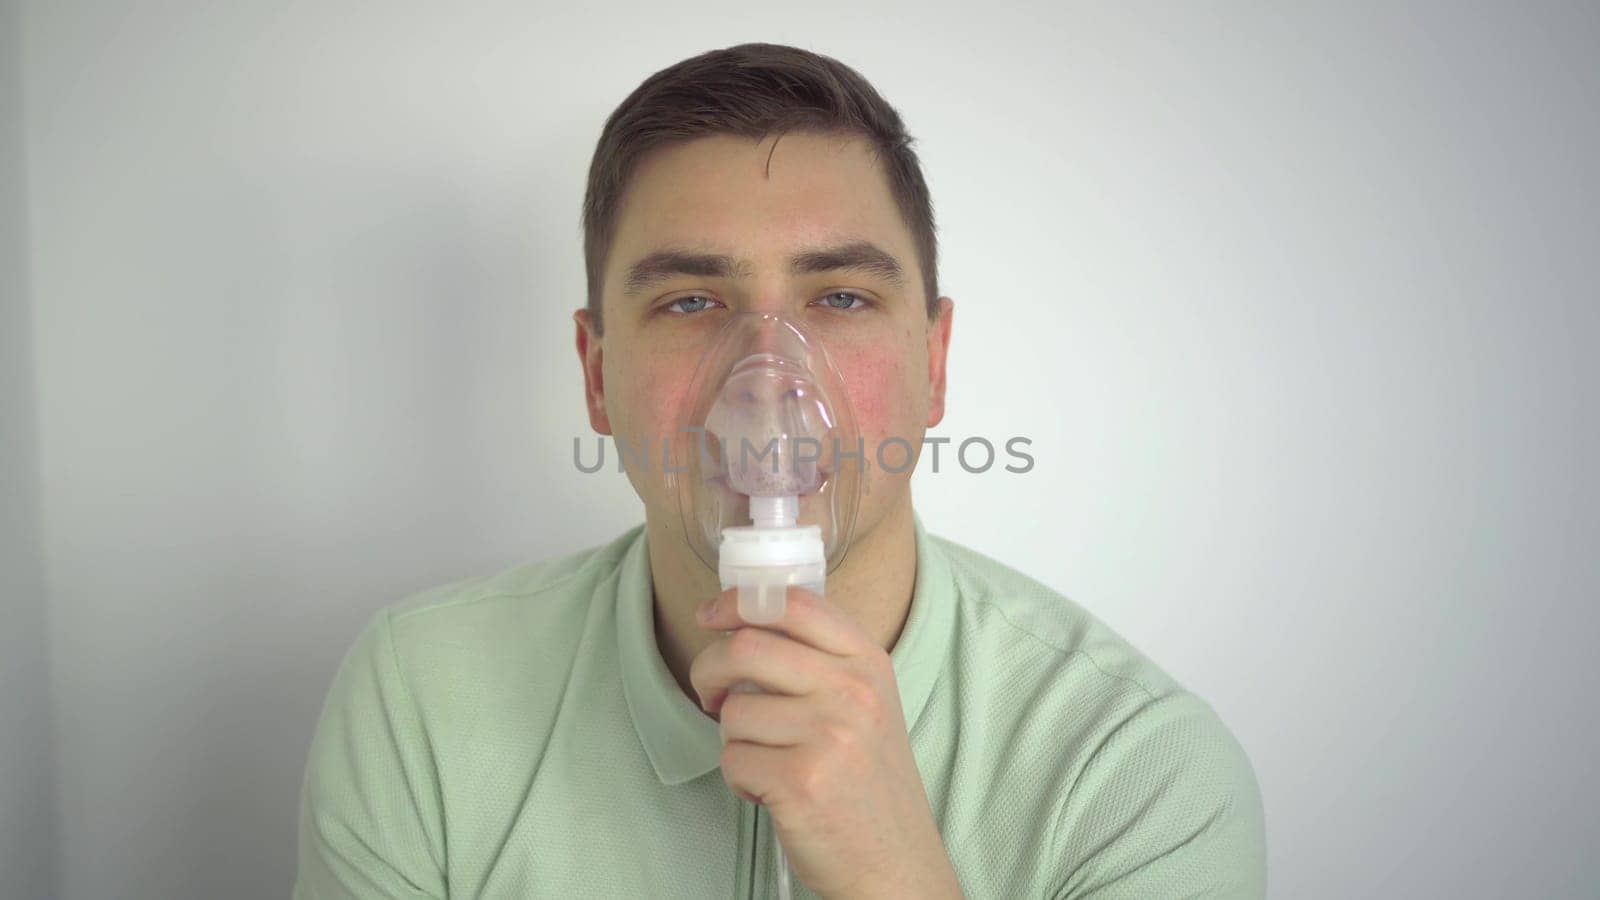 A young man breathes through an inhaler closeup. A man with an oxygen mask is being treated for a respiratory infection. 4k